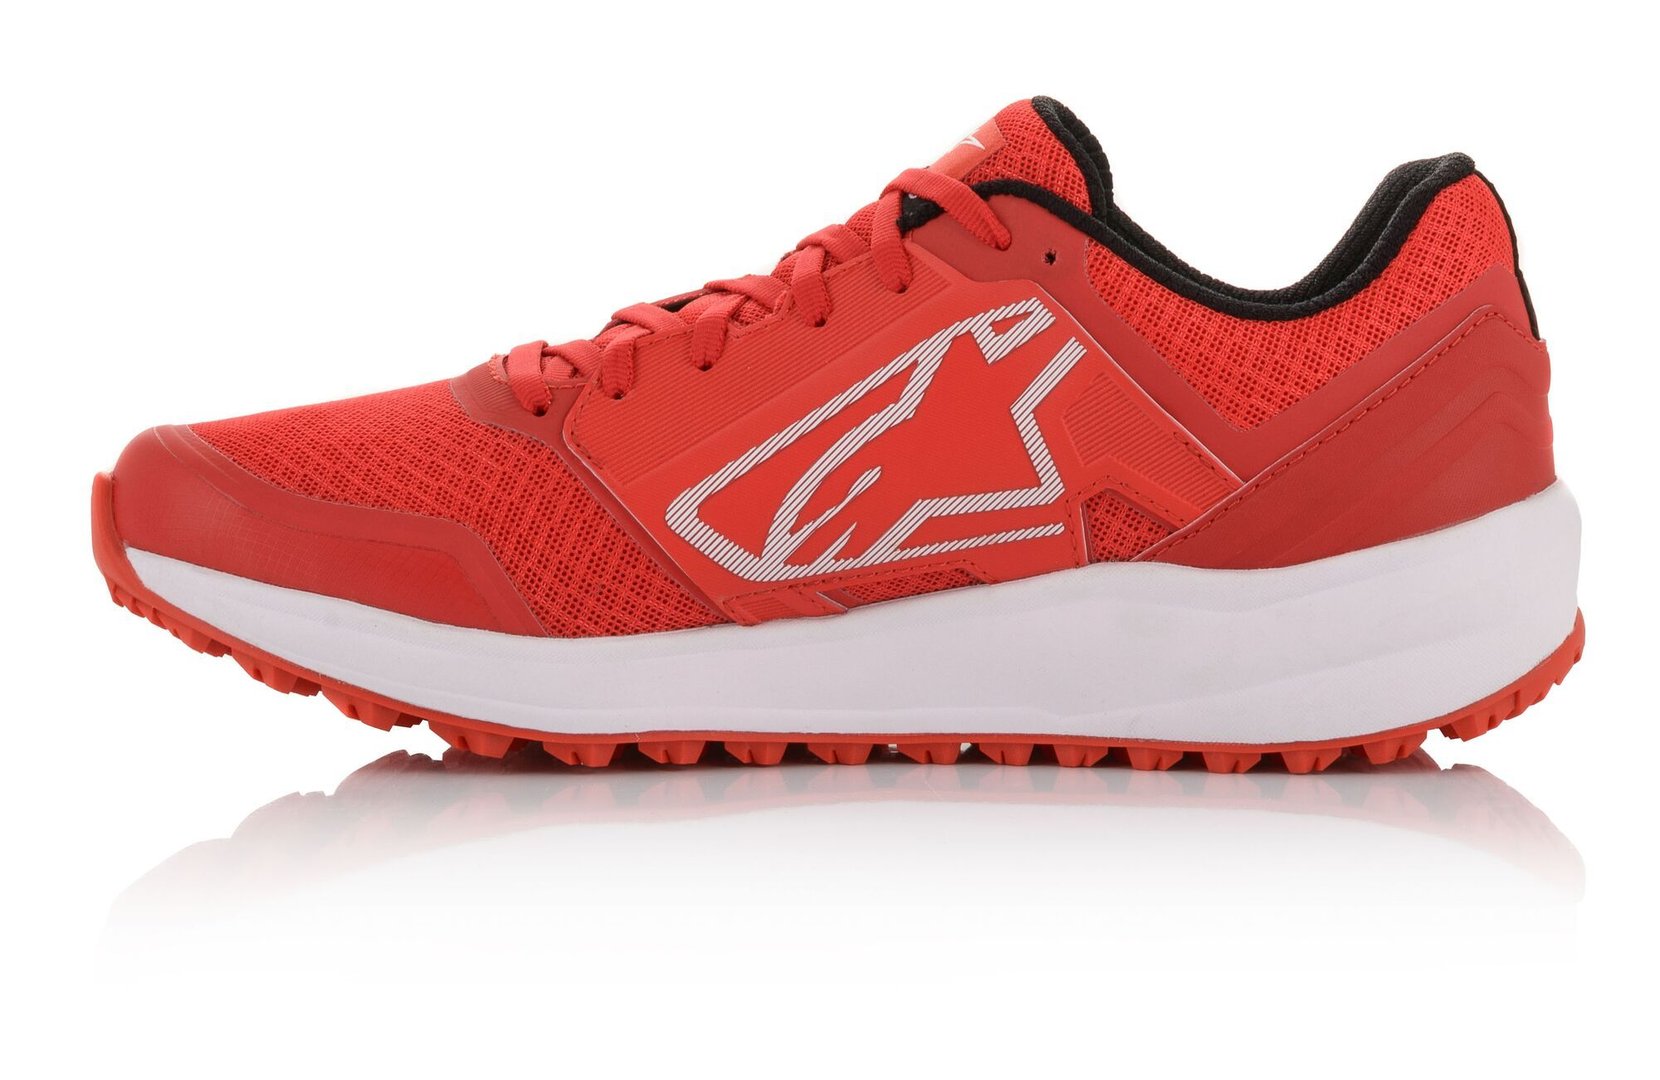 ALPINESTARS 2654820_32_13 META TRAIL RUNNING shoes, red/white, size 47 (13) (Фото-3)